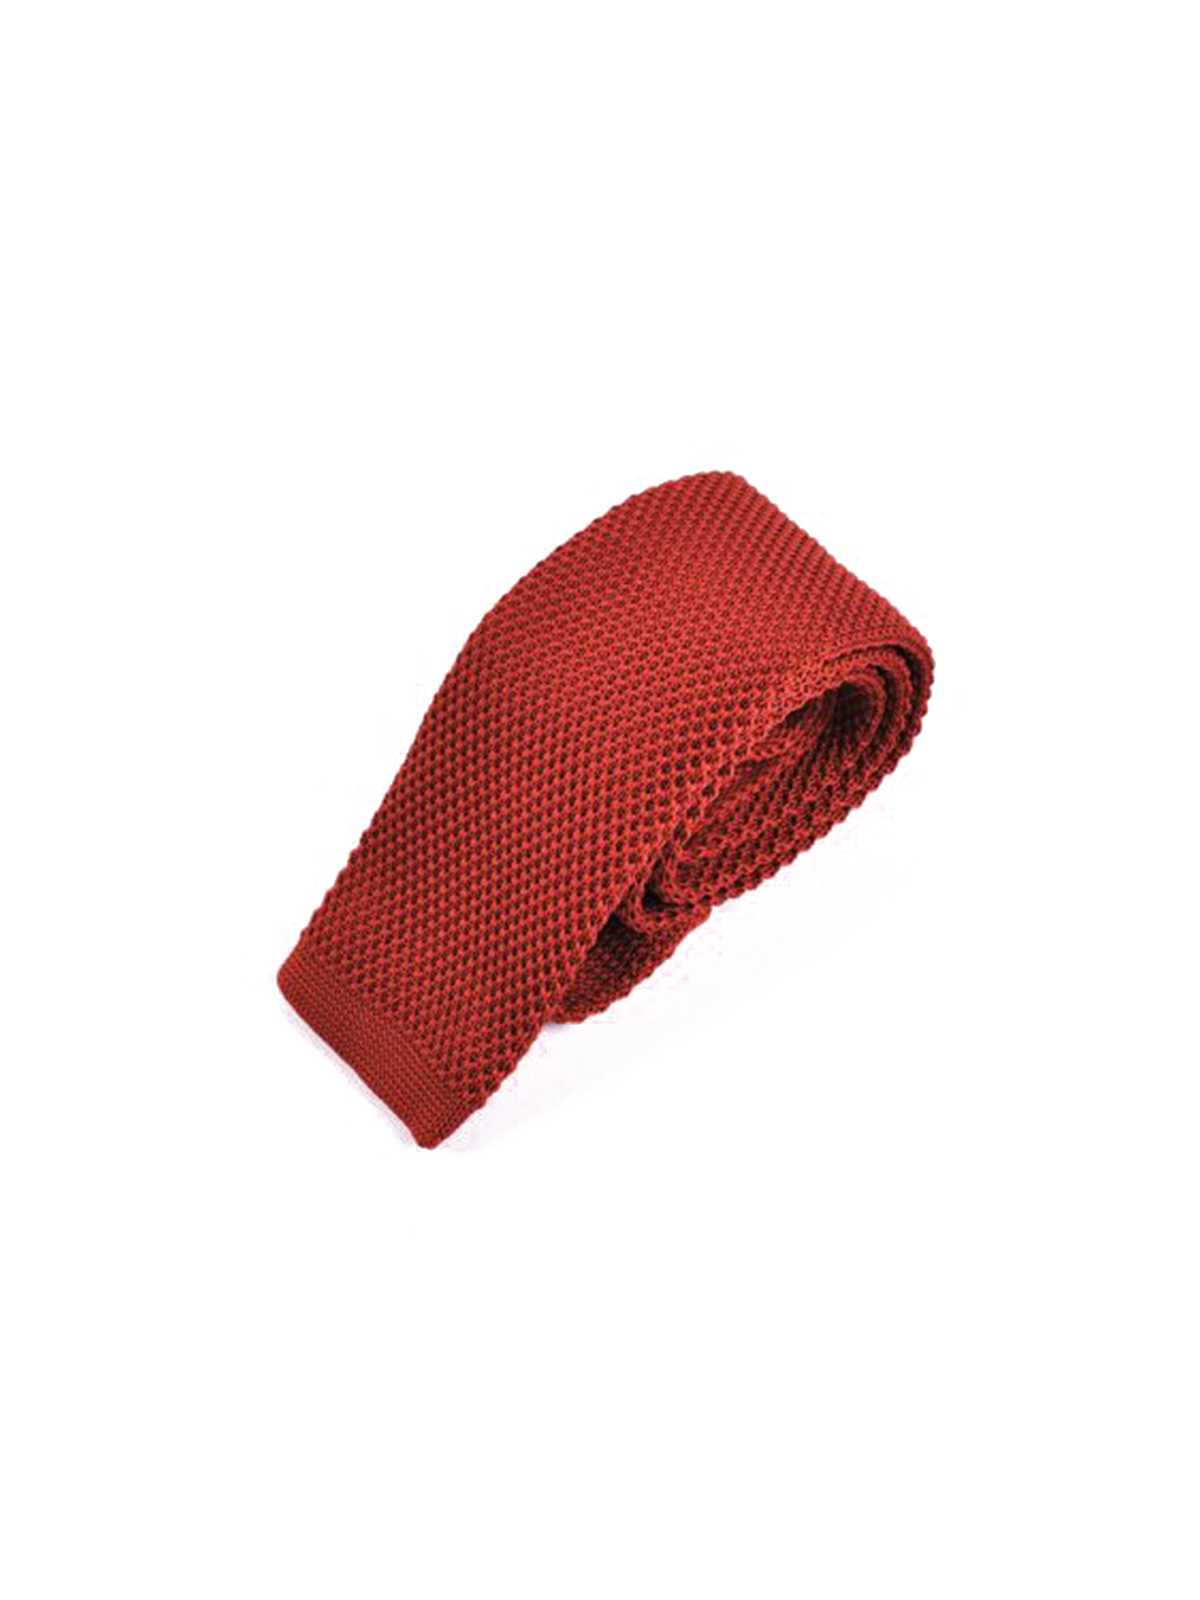 Italian-made straight-cut tie in knitted cotton piqué - Red